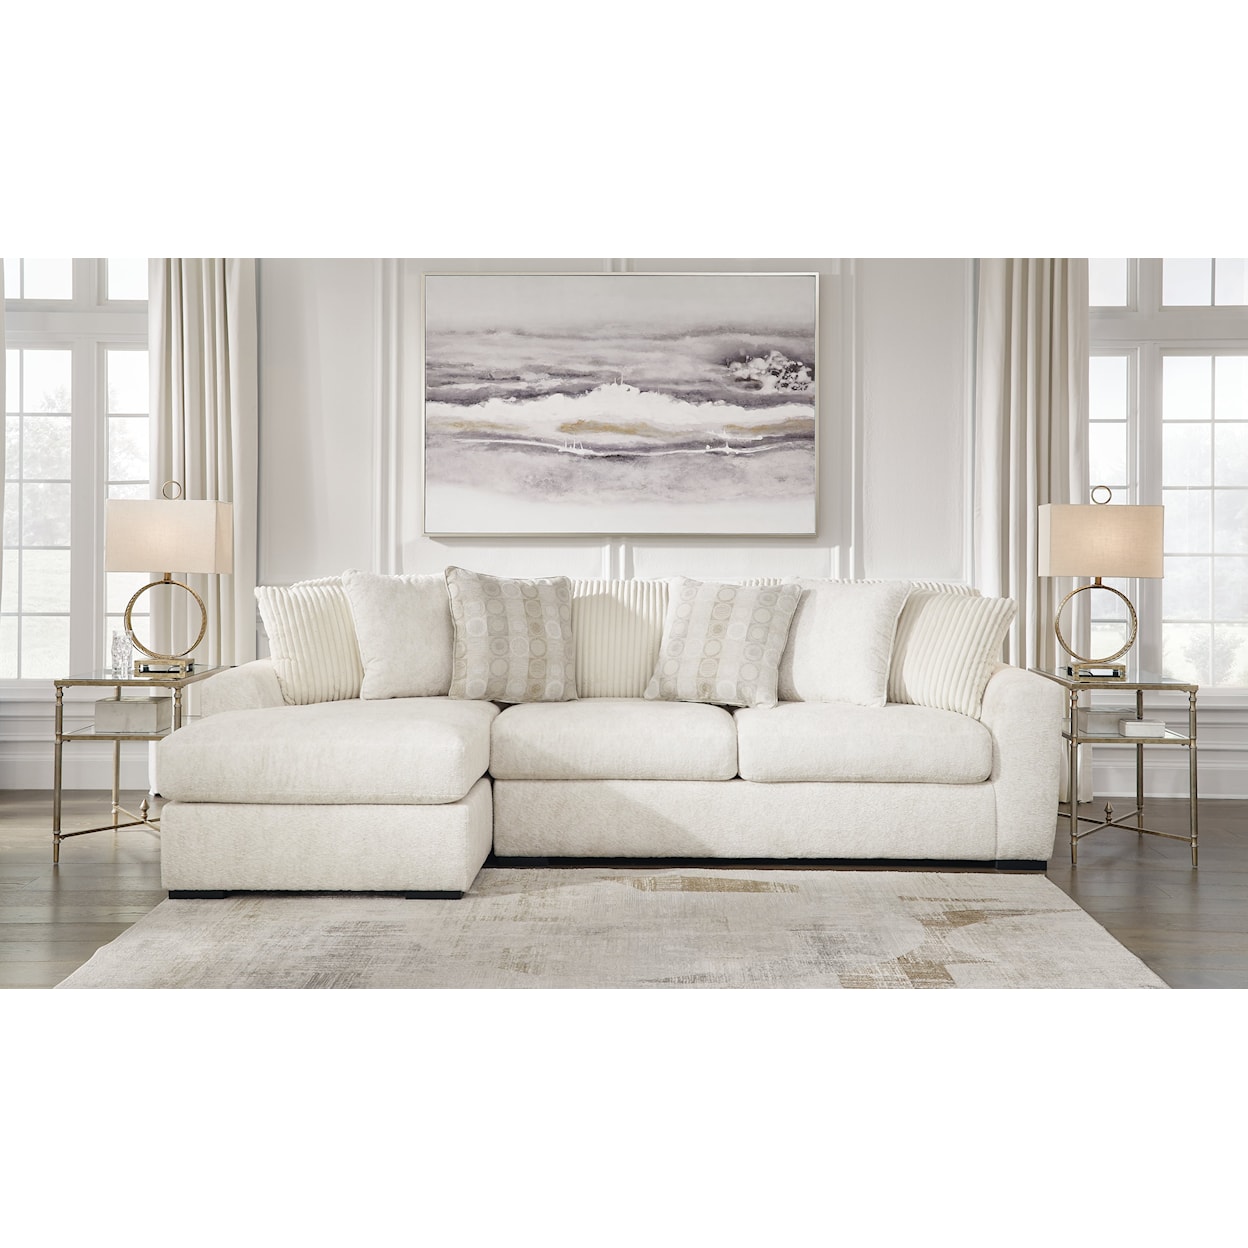 Signature Design by Ashley Chessington 2-Piece Sectional With Chaise